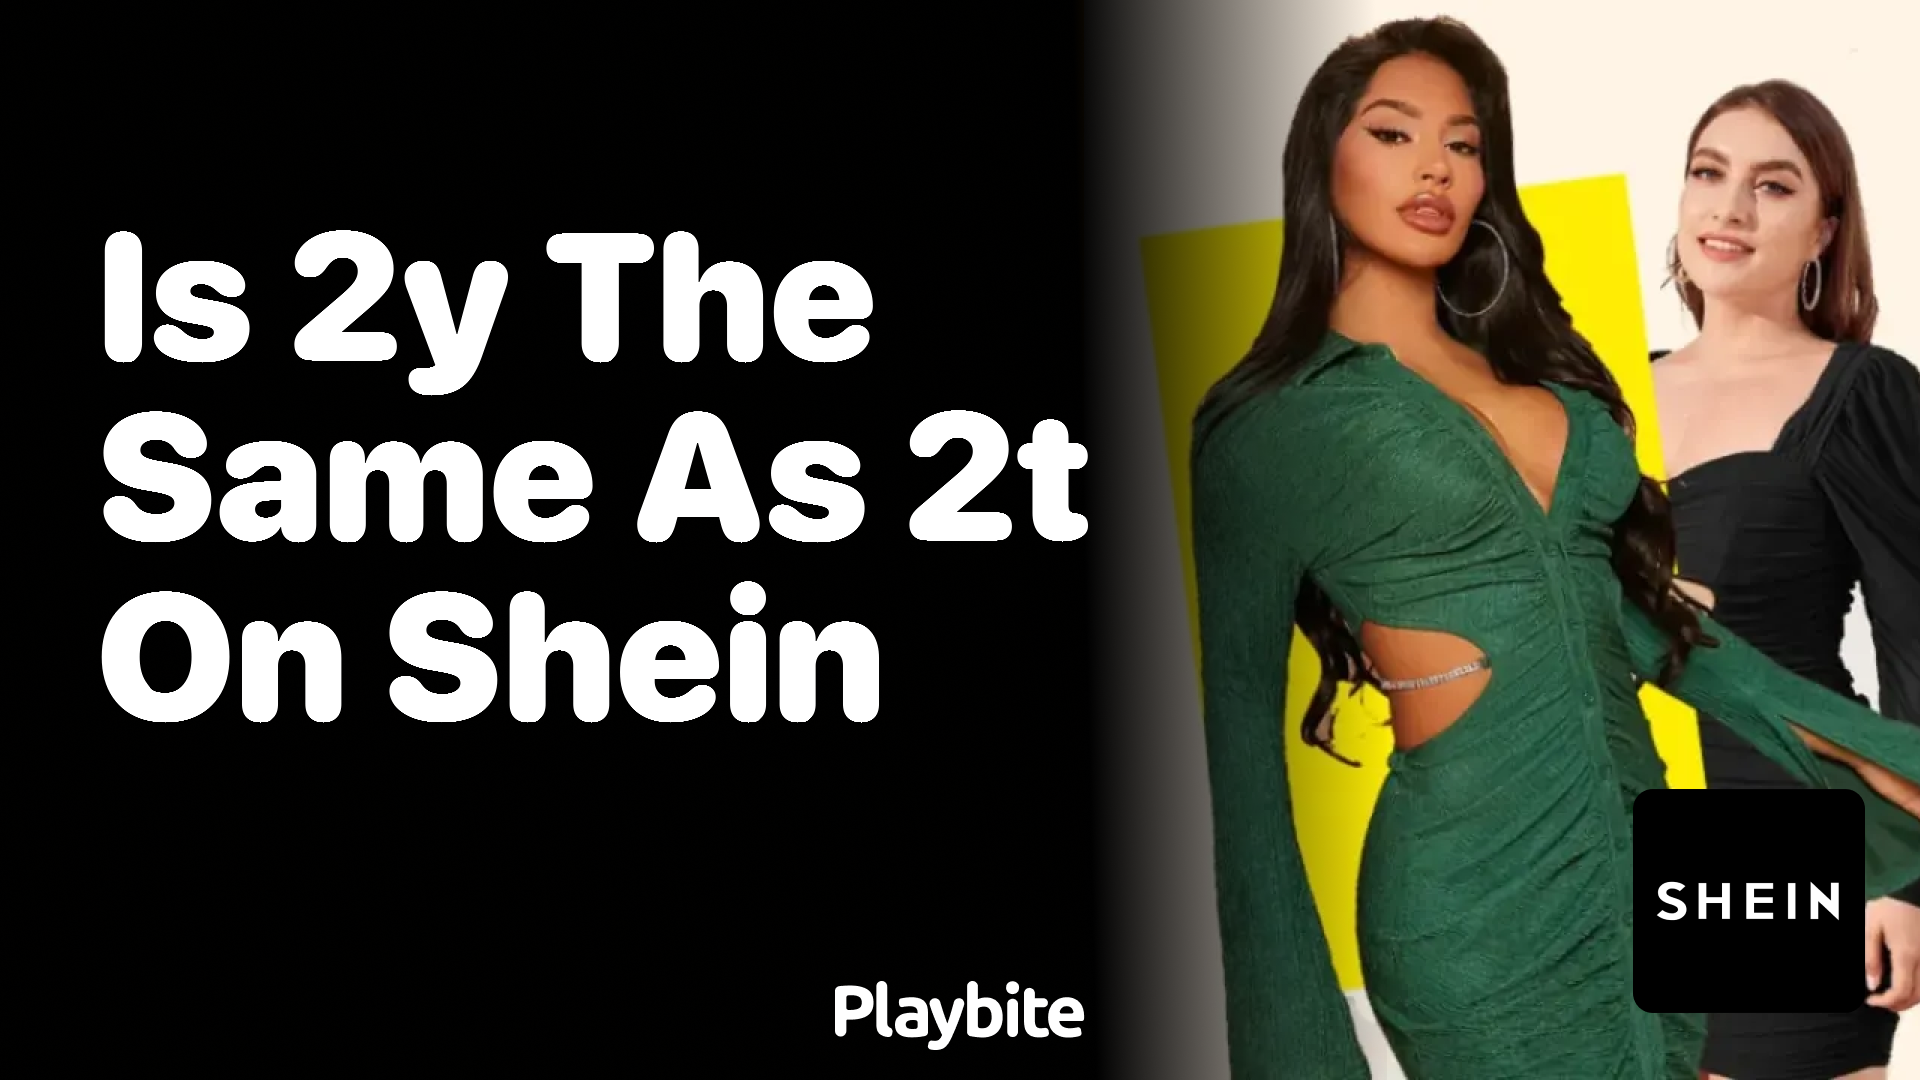 What Does 'Petite' Mean in SHEIN? - Playbite